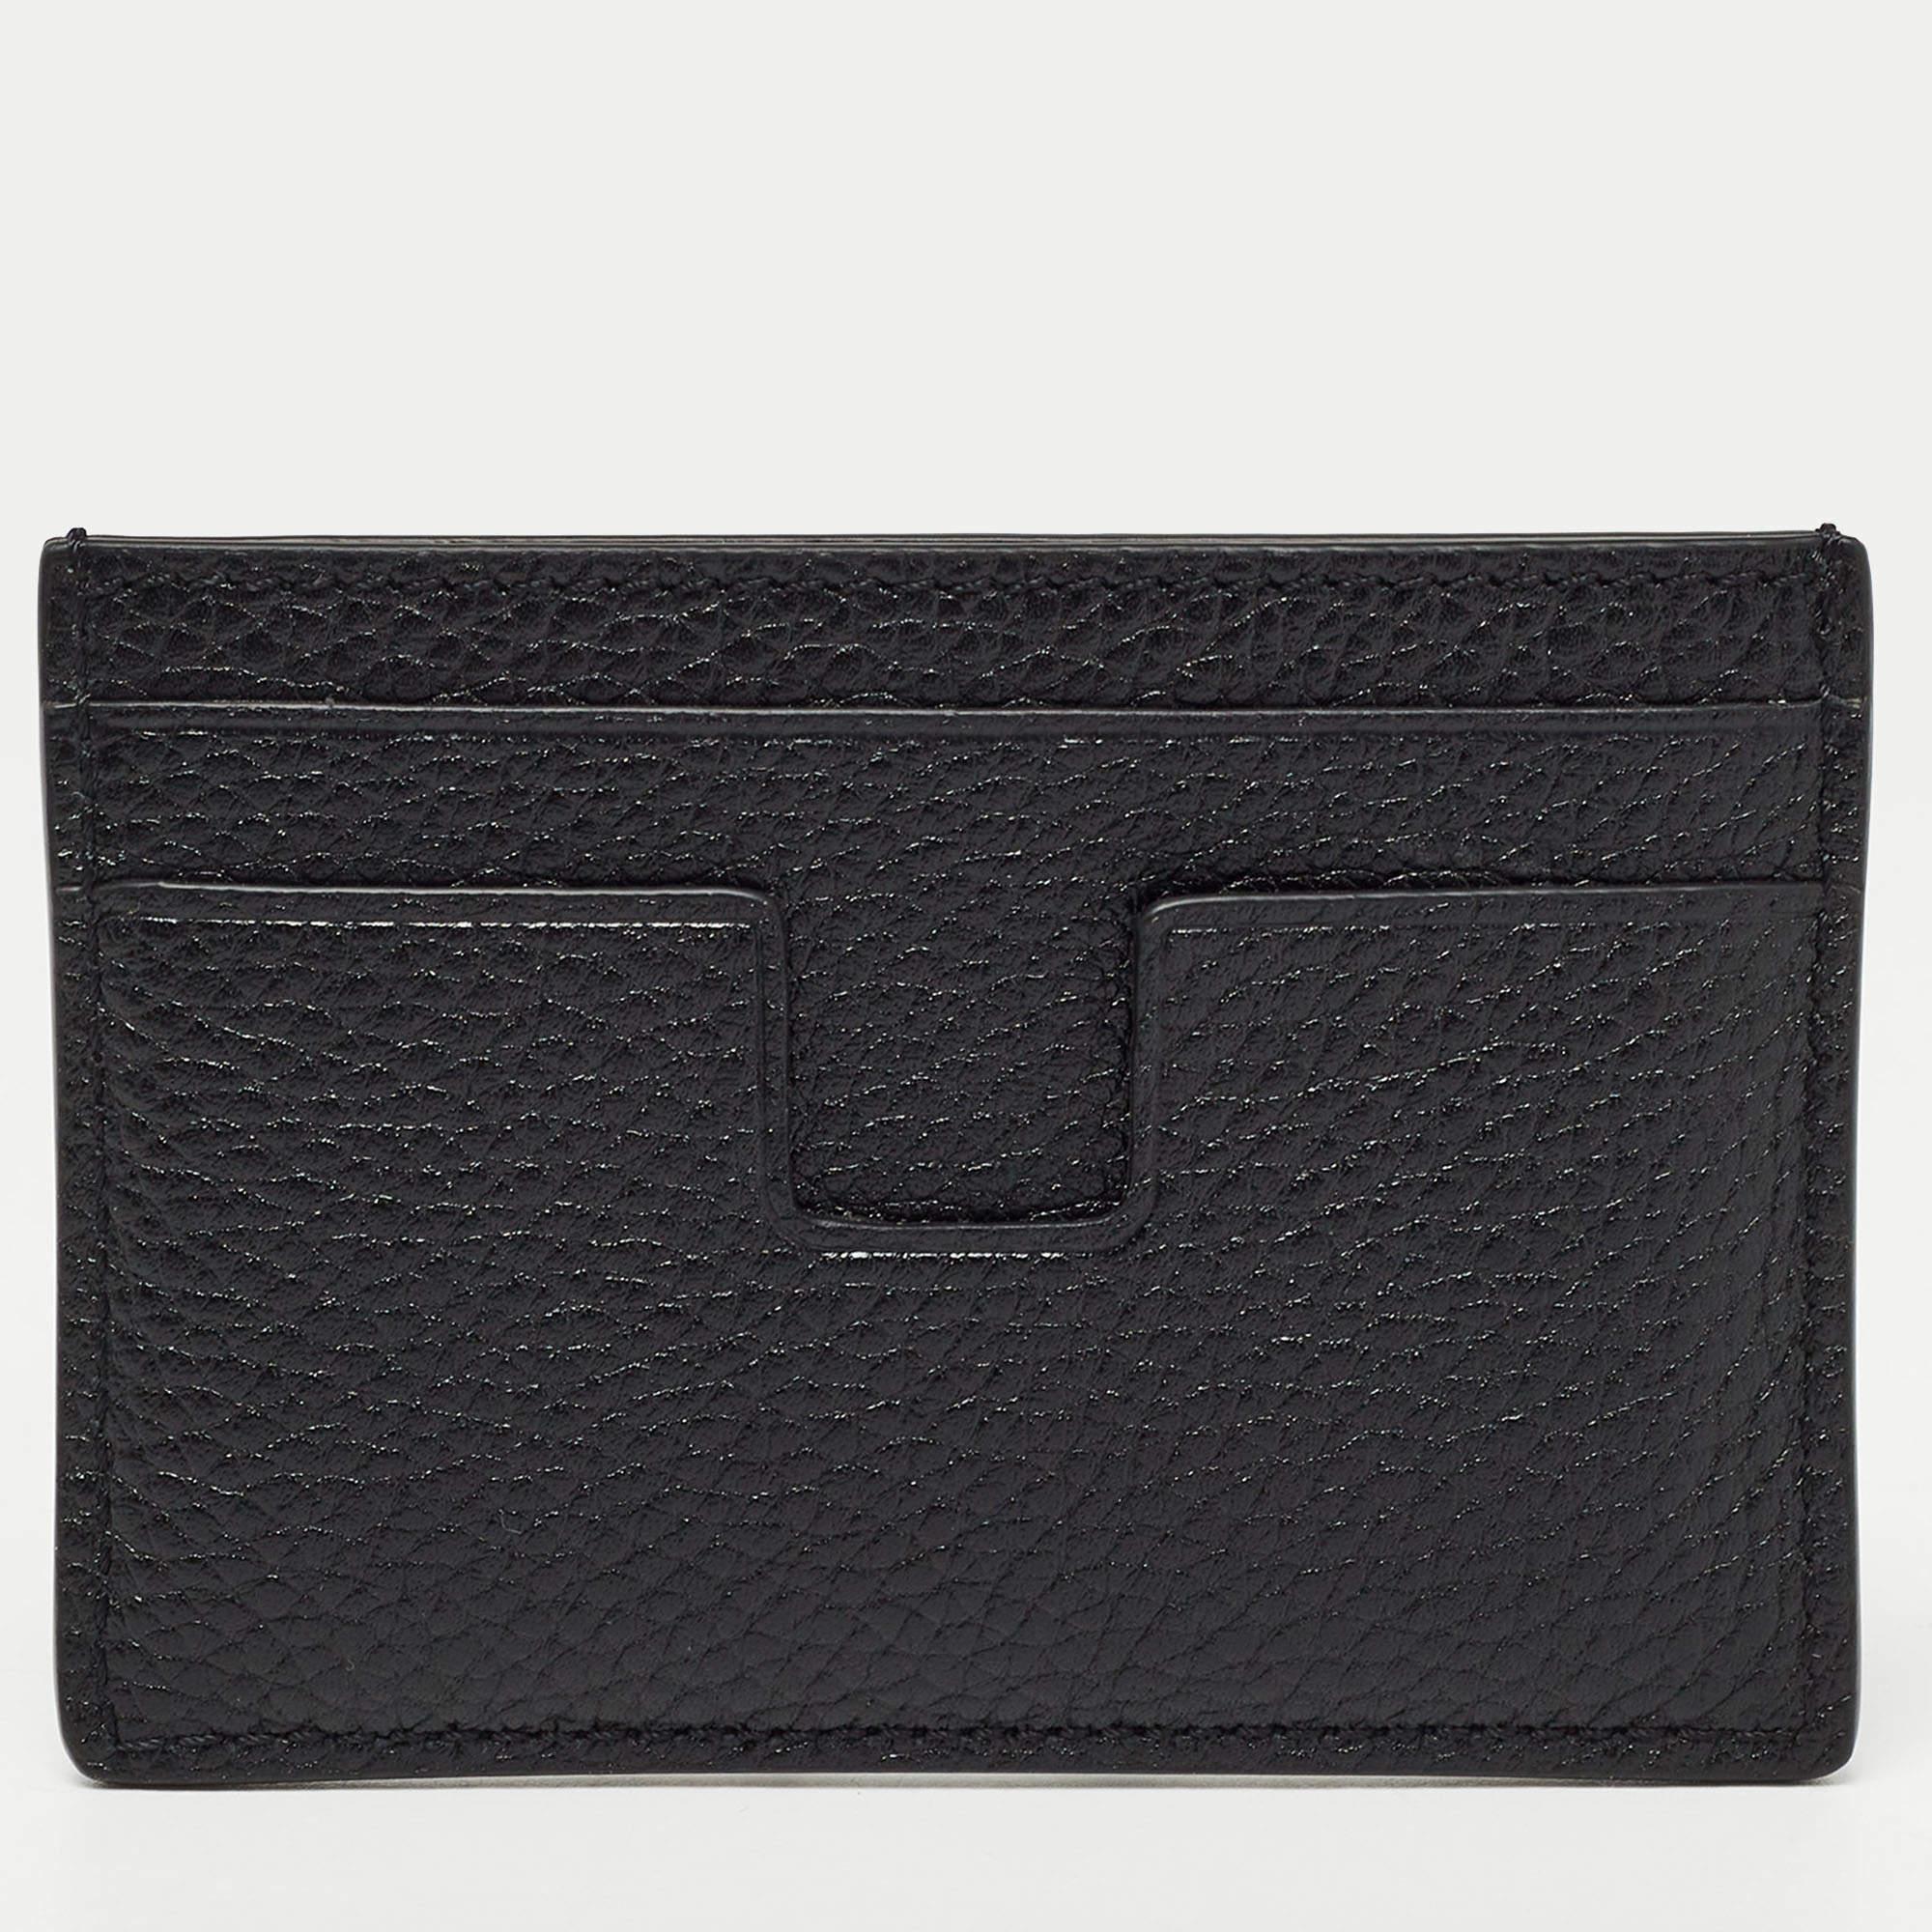 Designed smartly to hold cards or business cards, this Tom Ford card holder is stylish and functional. Crafted from black leather, it features multiple card slots and the brand label on the front. It is sleek and can easily fit into your